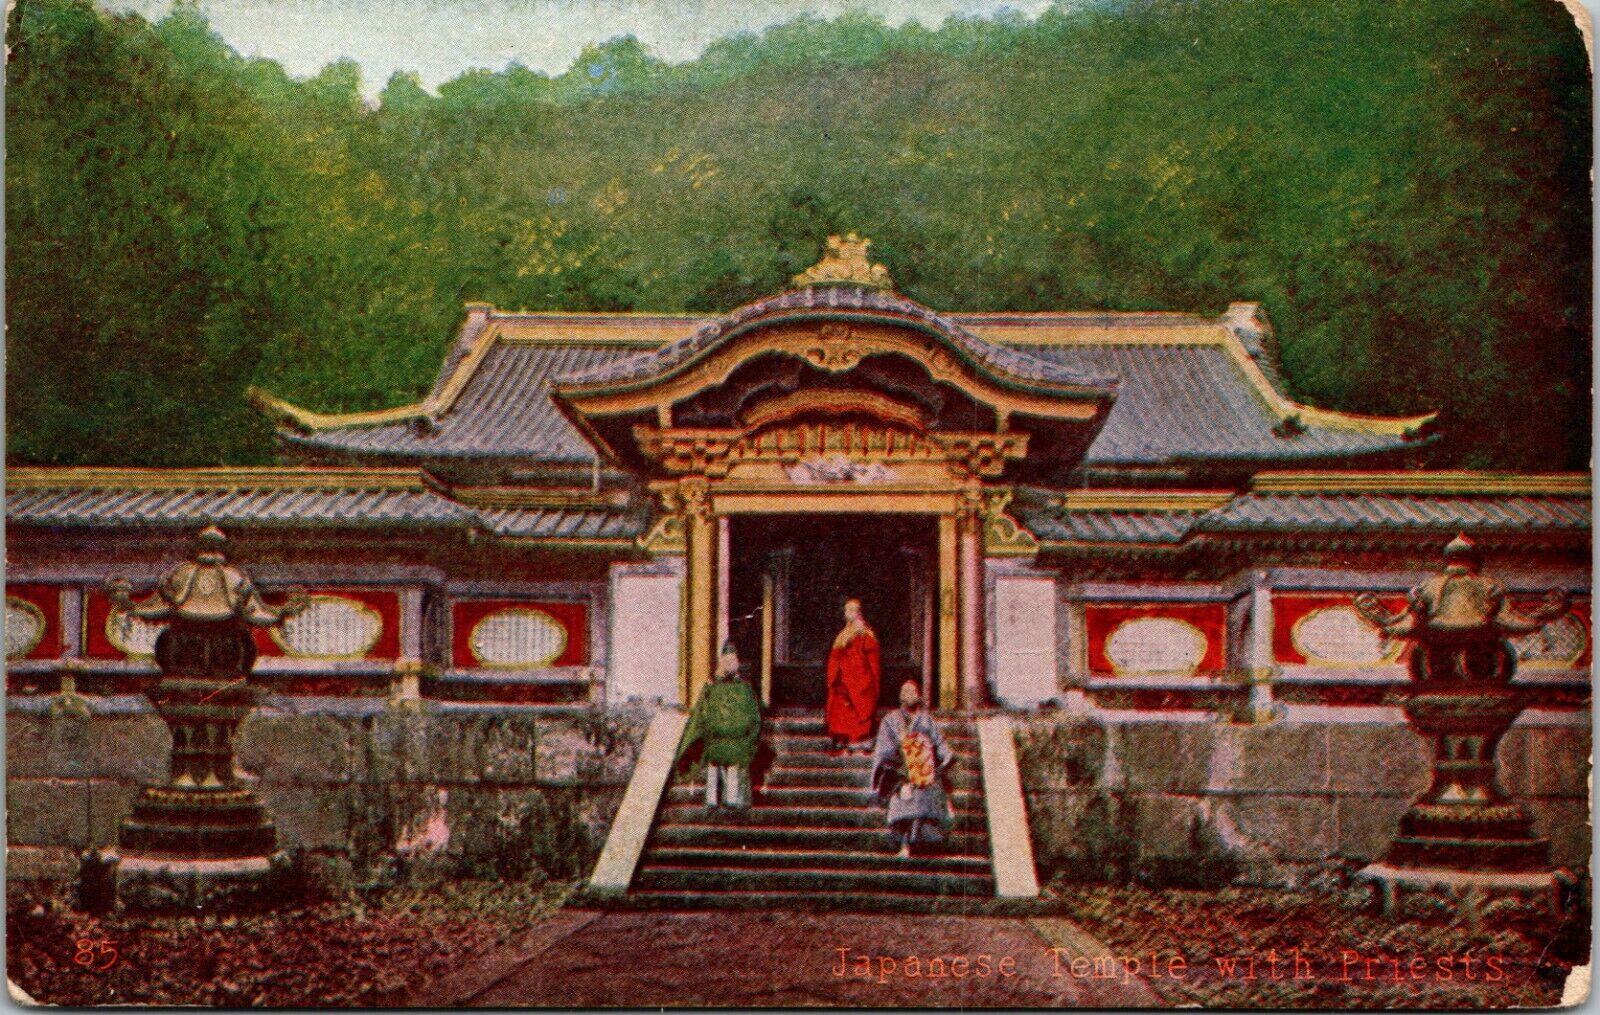 Japanese Temple with Priests turn of the Century Postcard 1900\'s